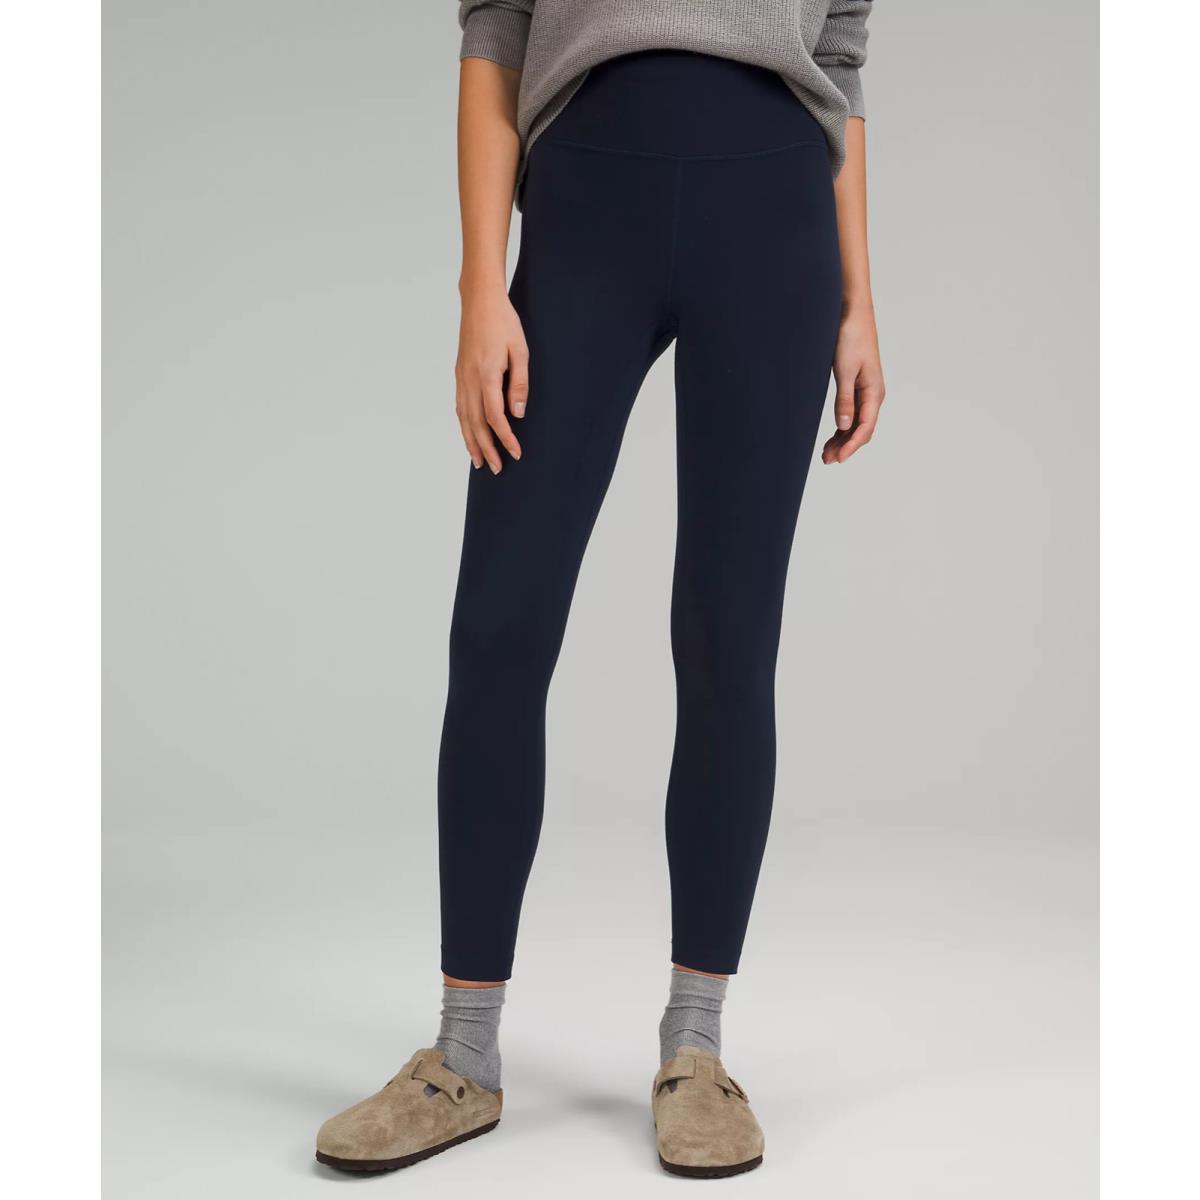 Lululemon Align Nulu High Rise Pant with 25 Inch Inseam True Navy